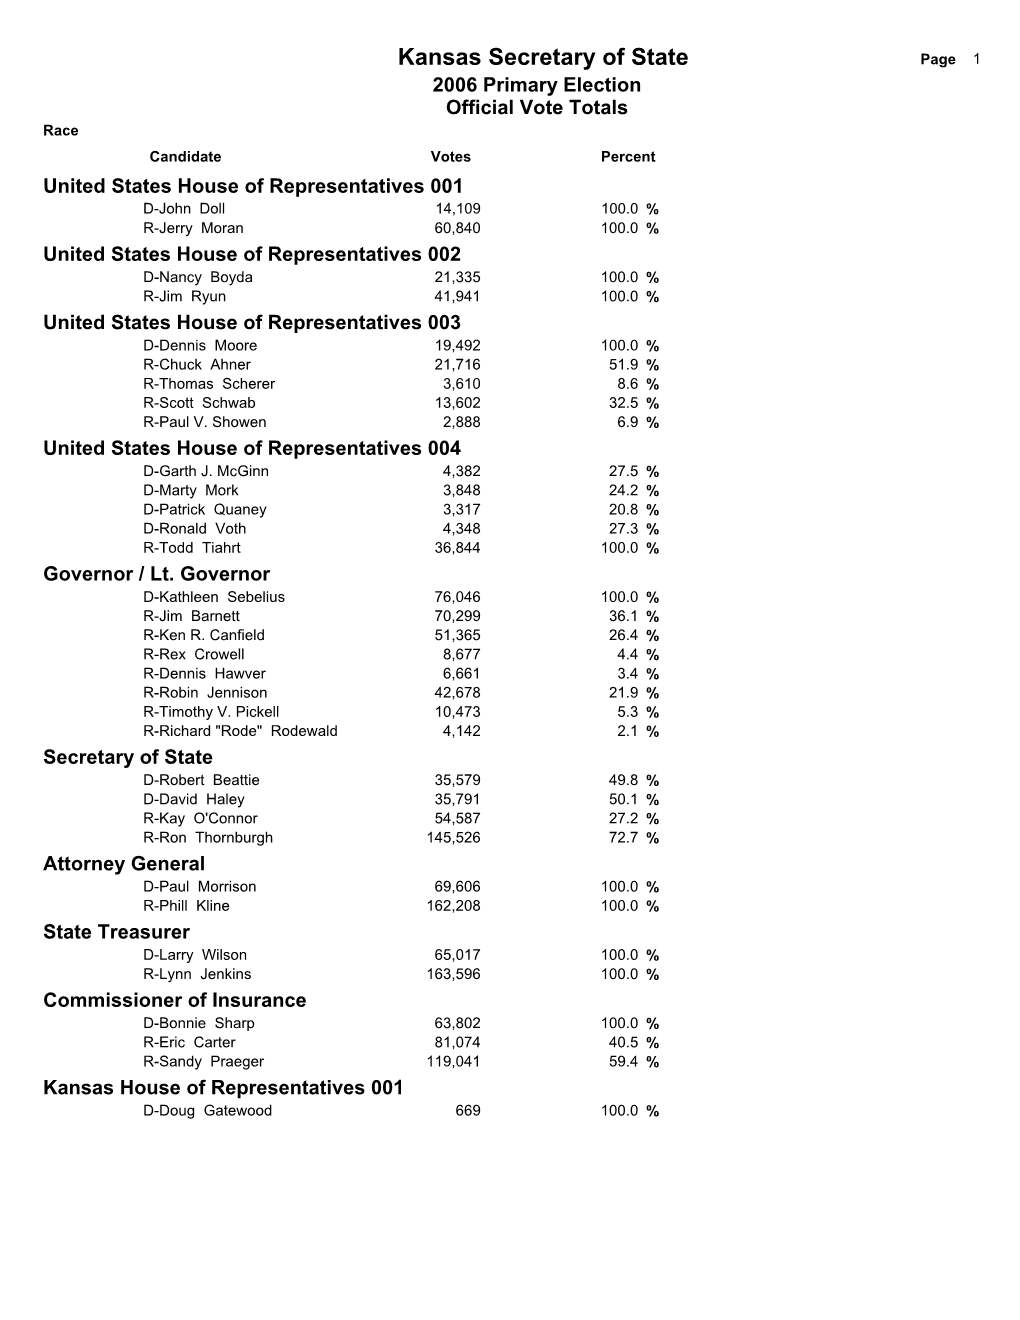 Official 2006 Primary Election Results